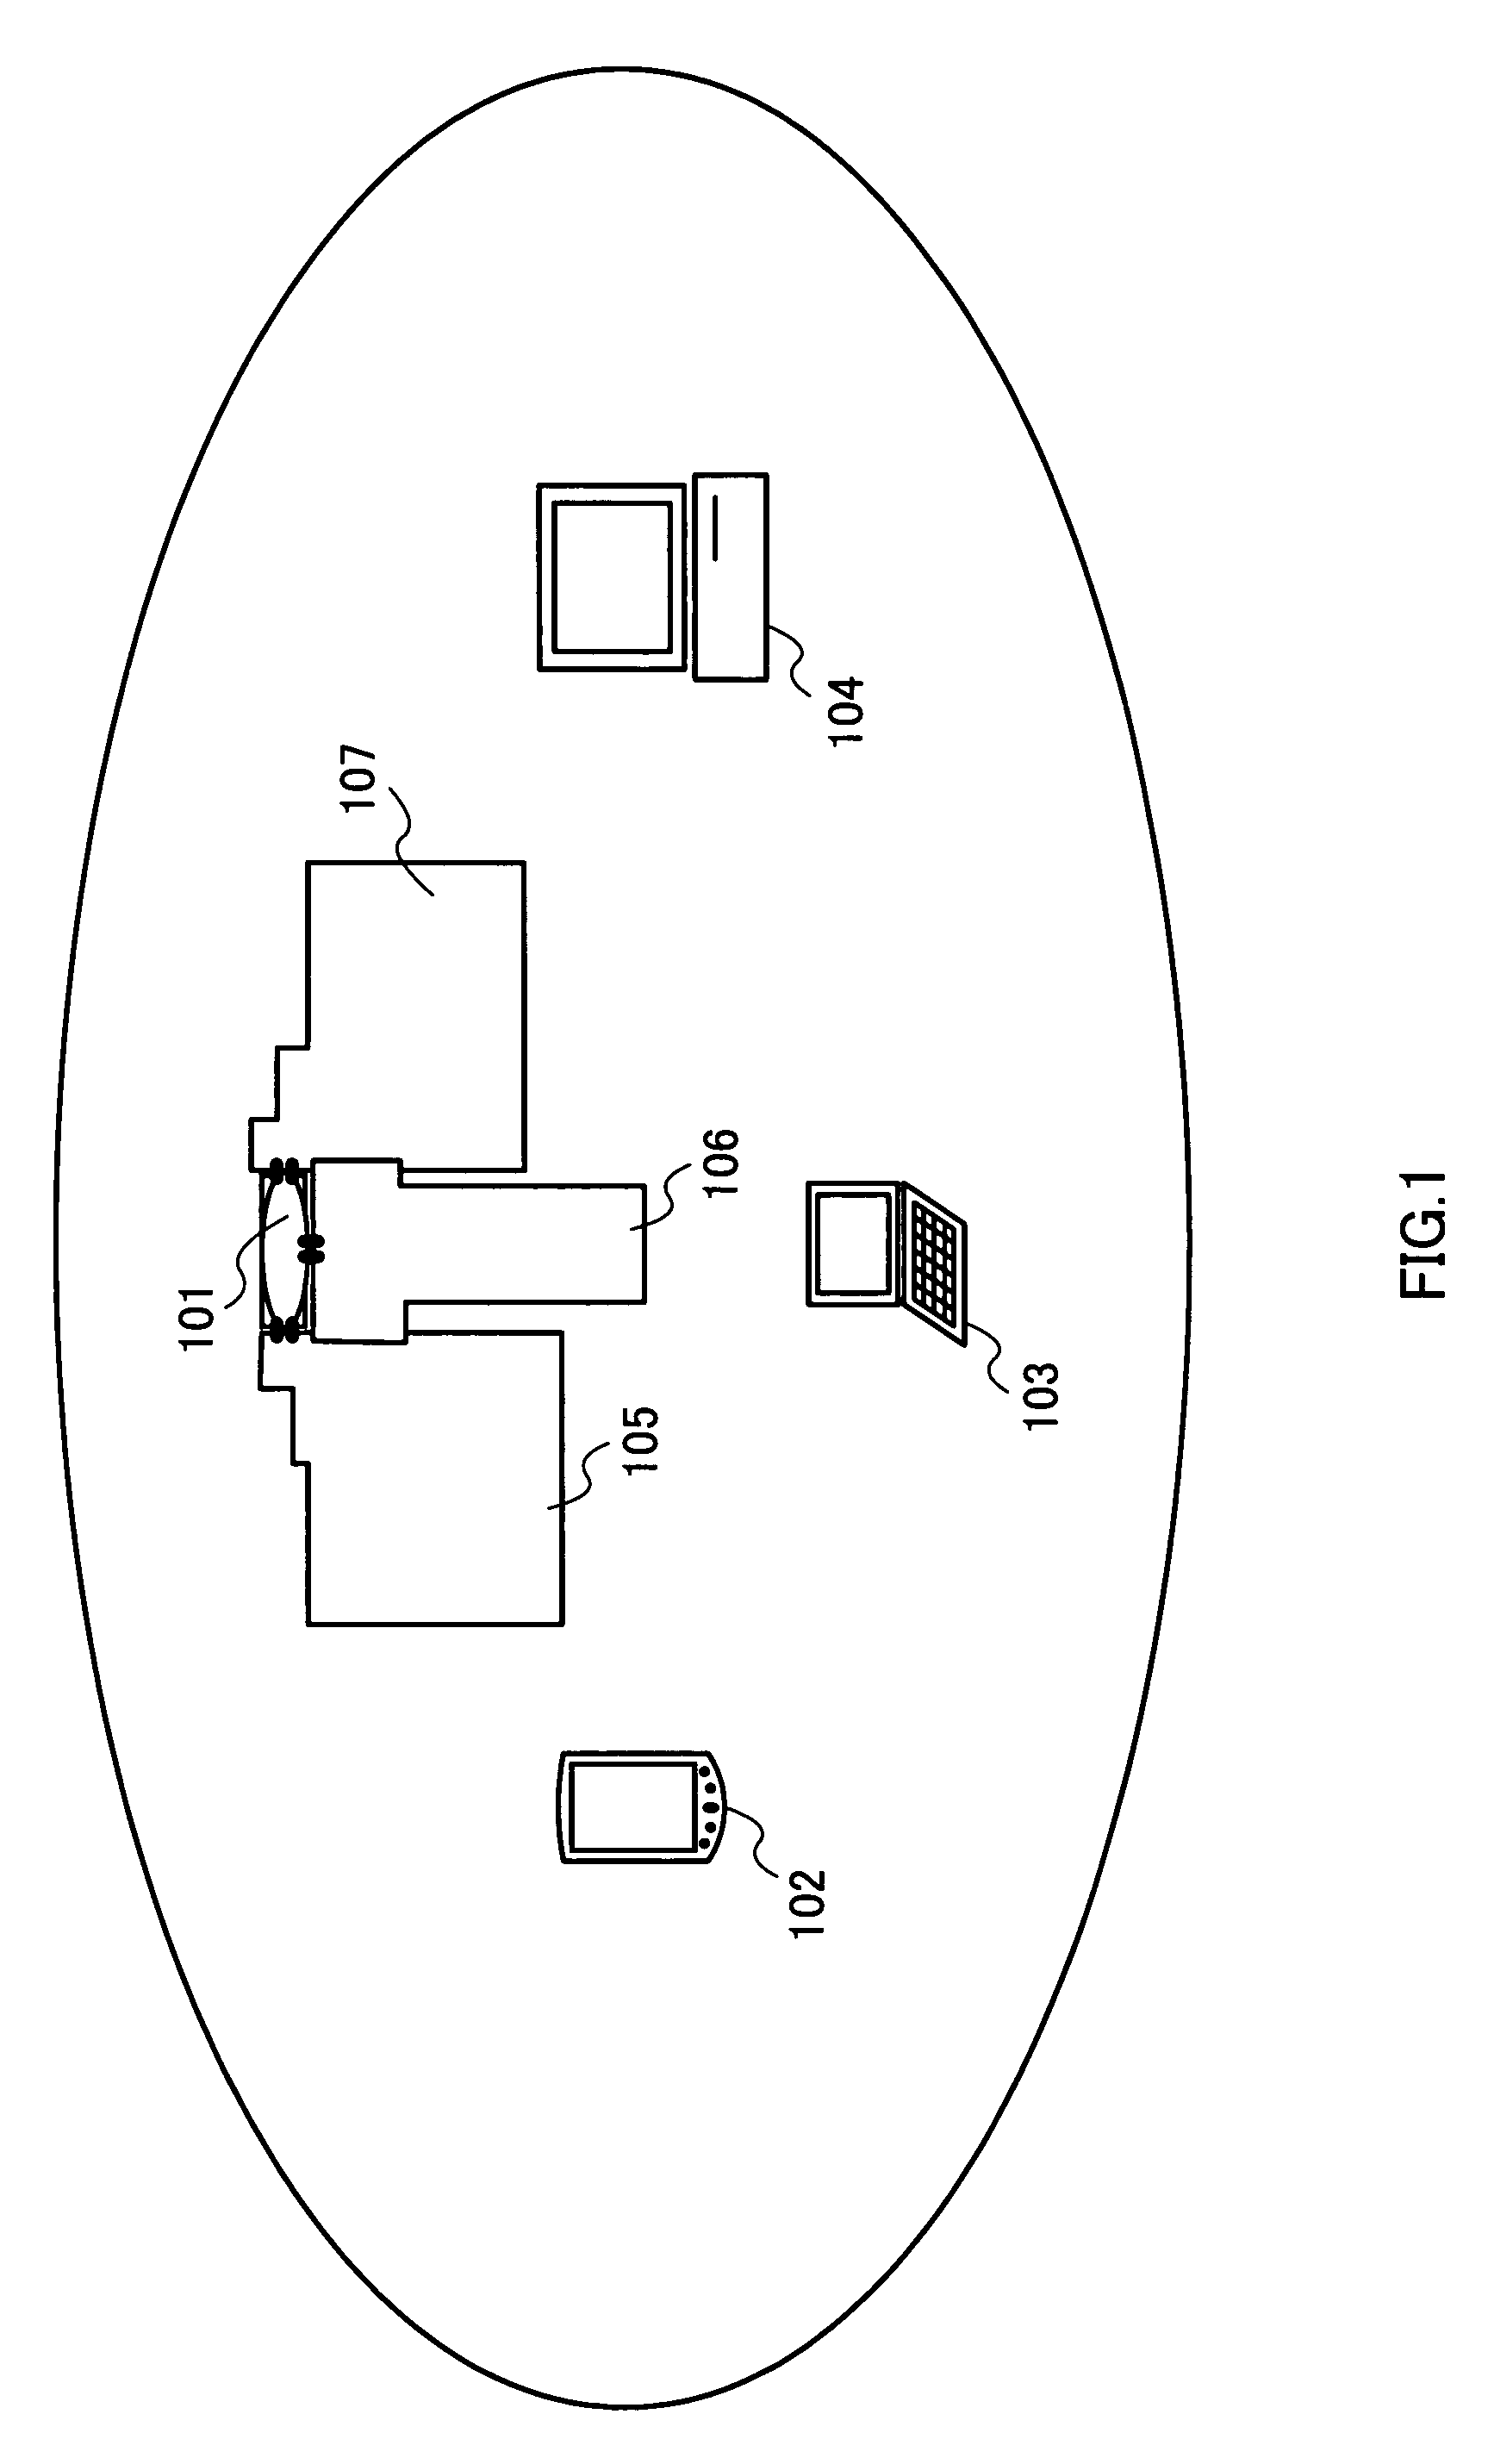 Access point in a wireless network medium access control system